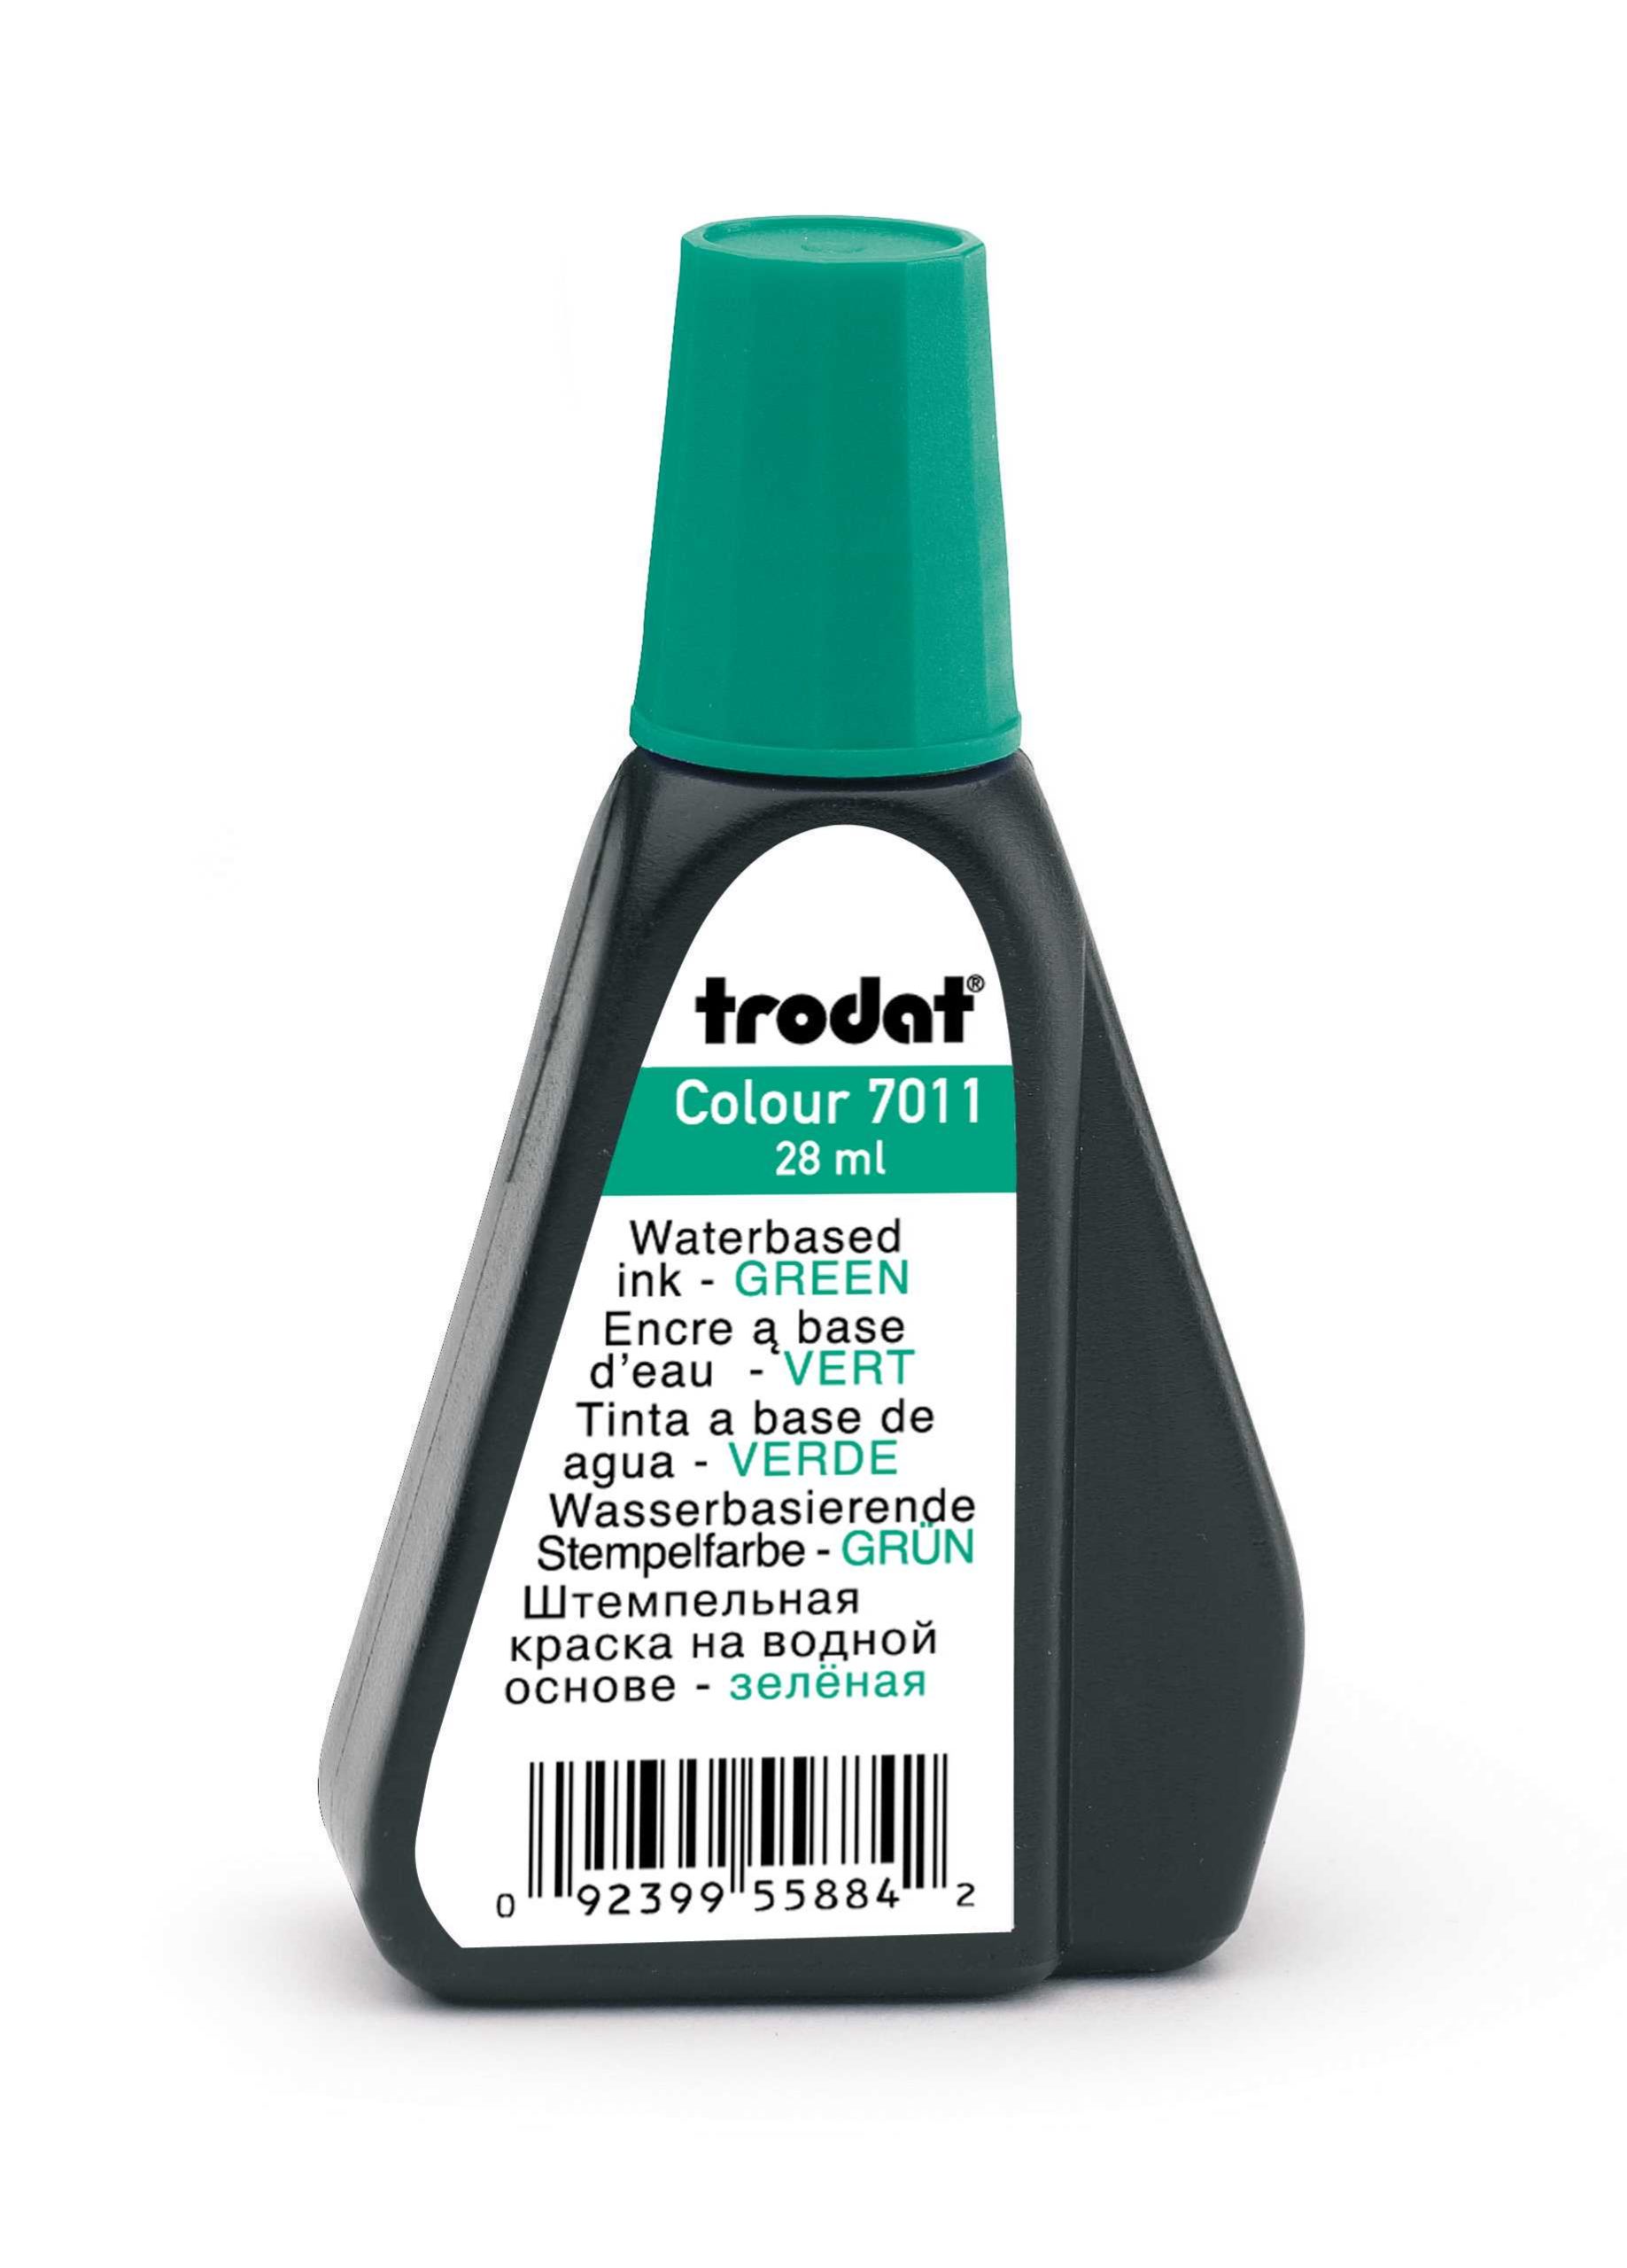  Trodat Green Ink Bottle - 28 ml - Replacement Ink for